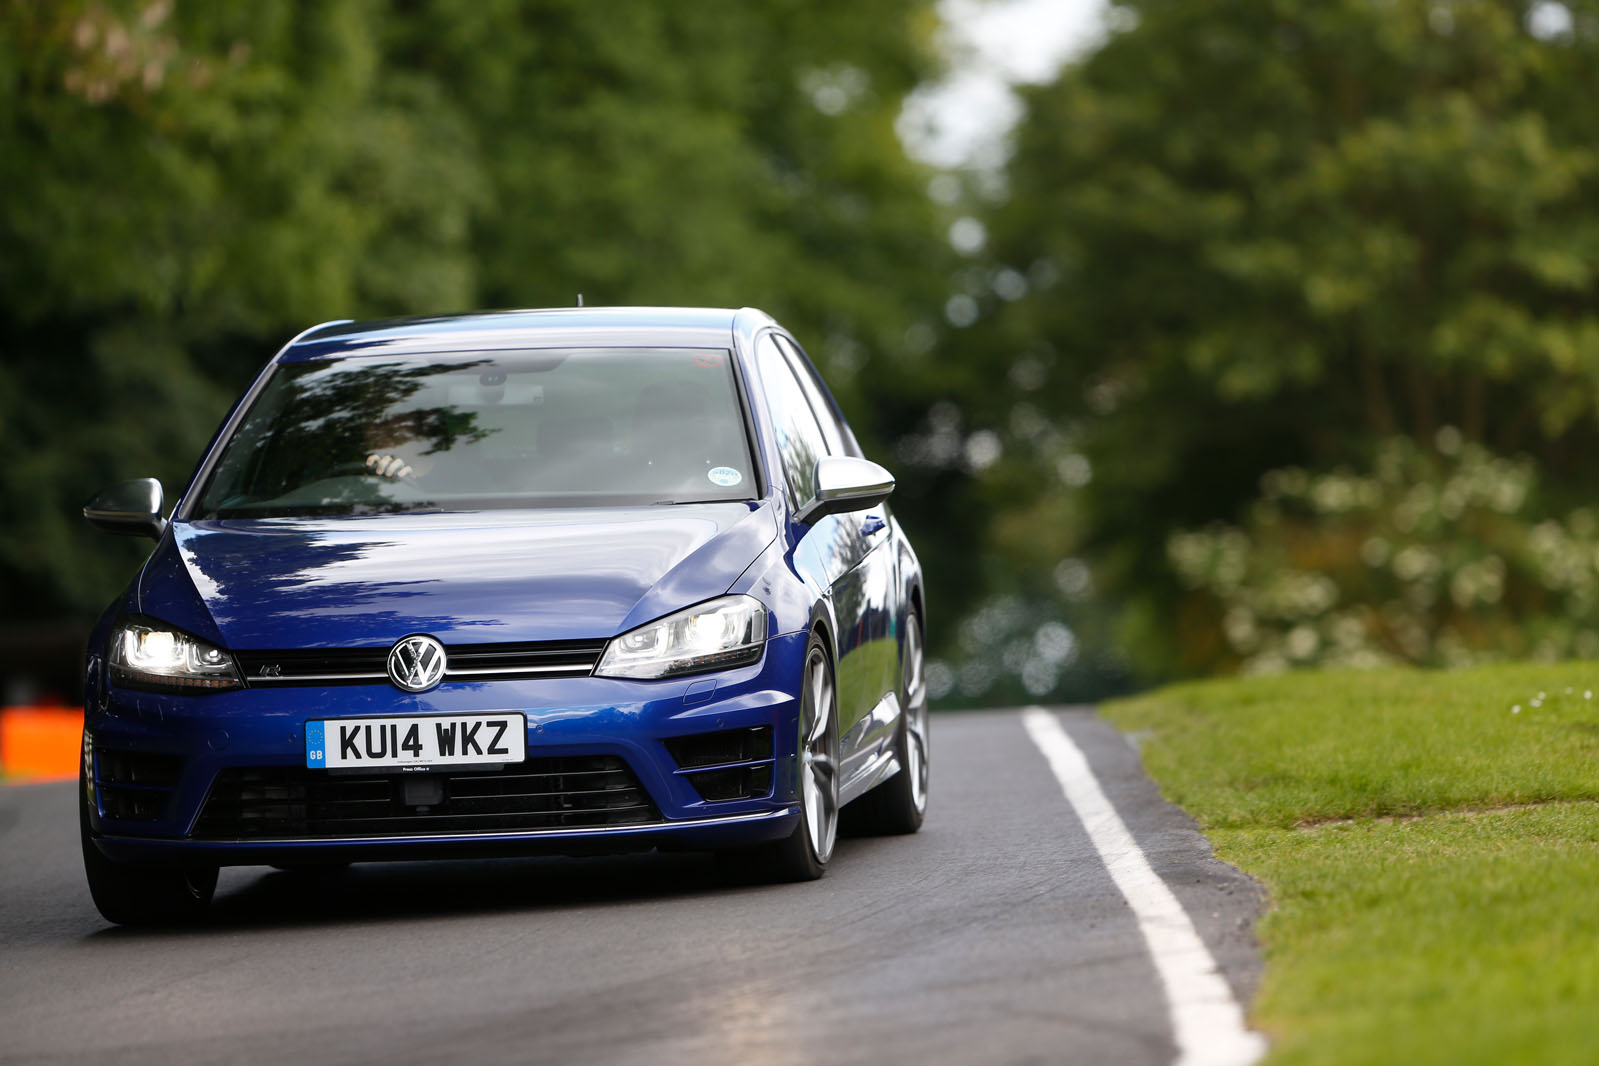 Nearly new buying guide: Volkswagen Golf Mk7 GTI/R